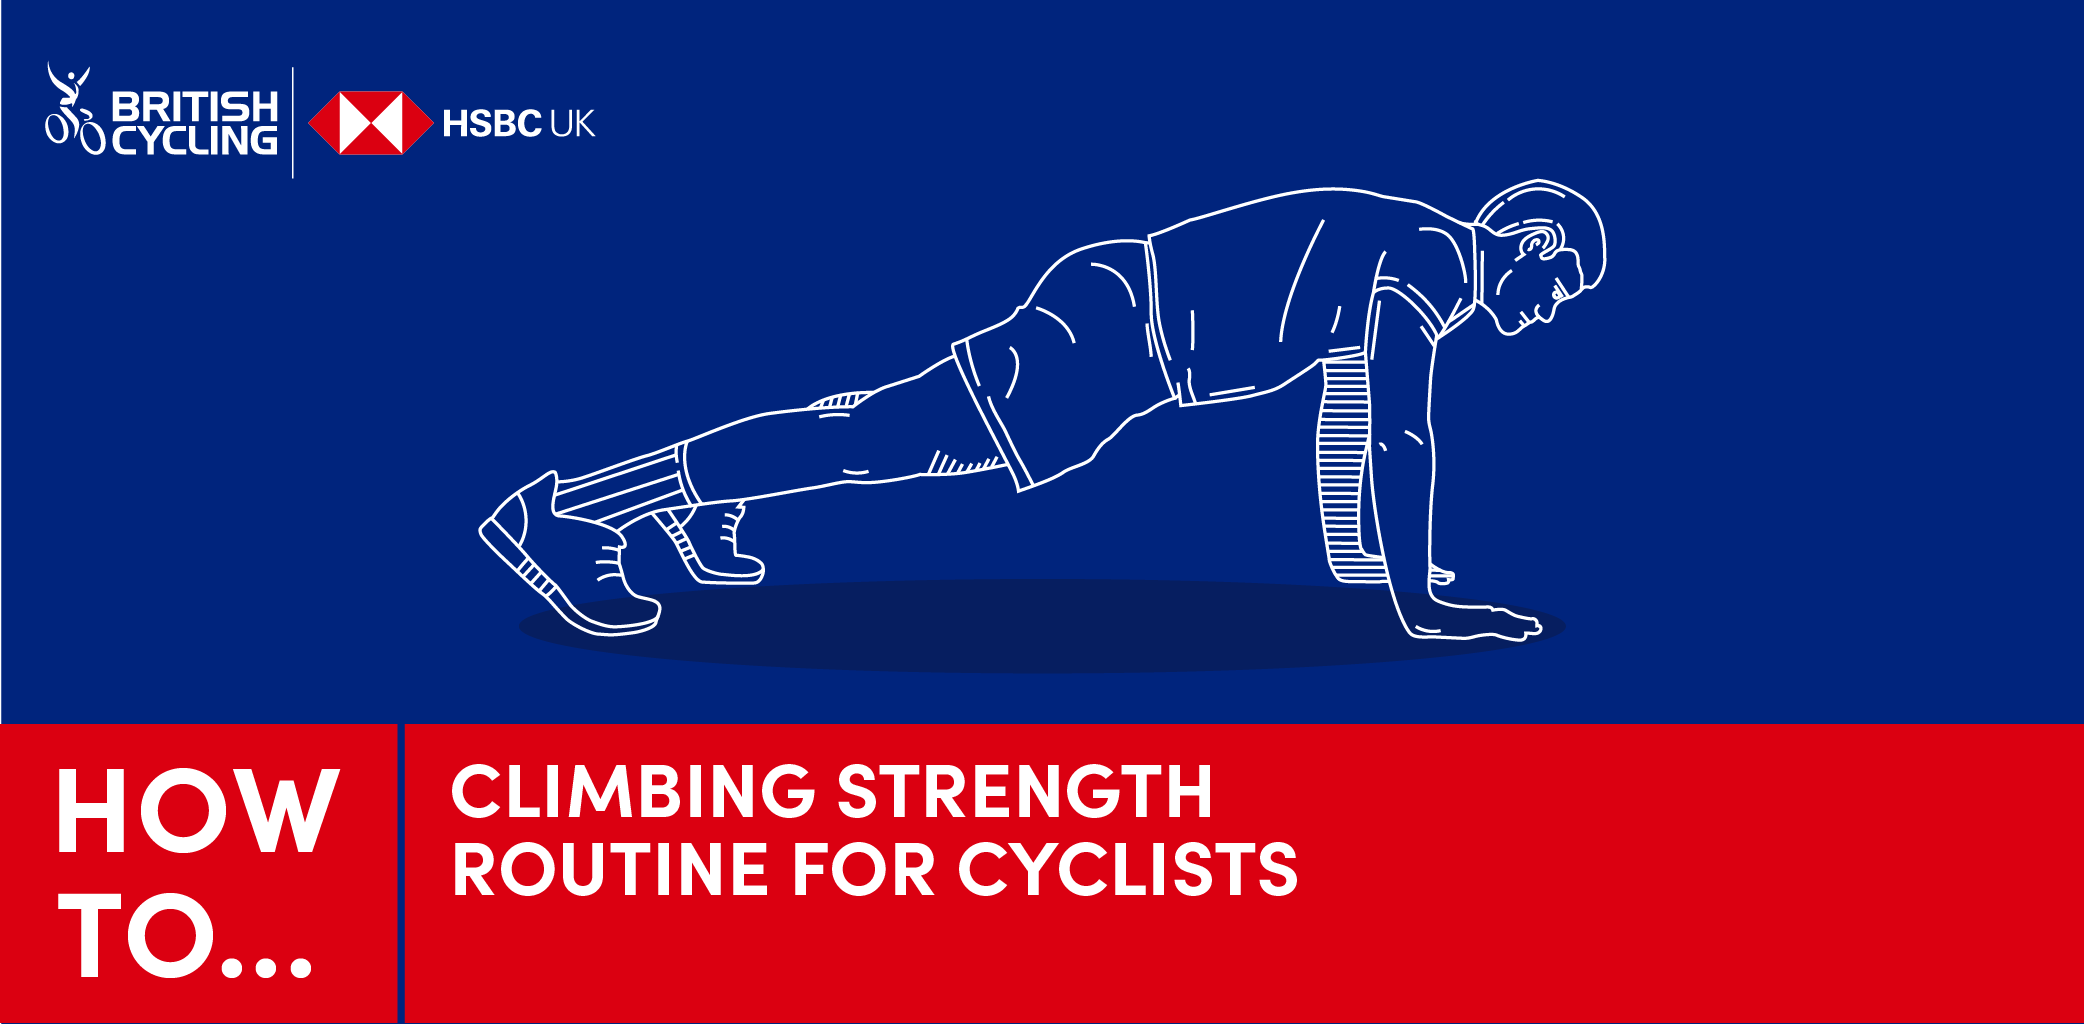 Climbing strength routine for cyclists